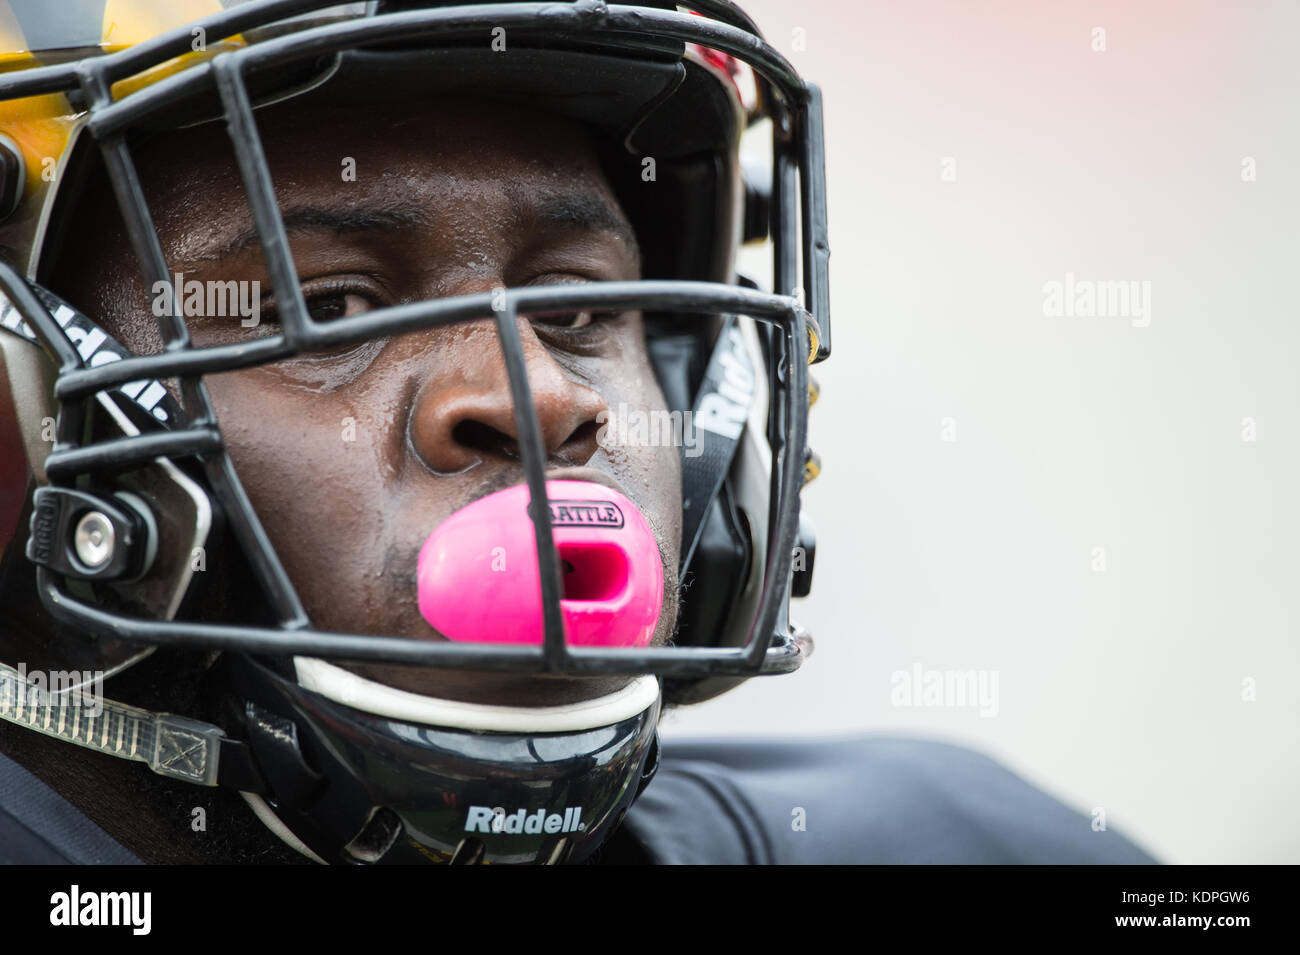 College Park, Maryland, USA. 14th Oct, 2017. Nose tackle KINGSLEY OPARA (8) warms up before the game held at the Capital One Field at Maryland Stadium, College Park, Maryland. Credit: Amy Sanderson/ZUMA Wire/Alamy Live News Stock Photo